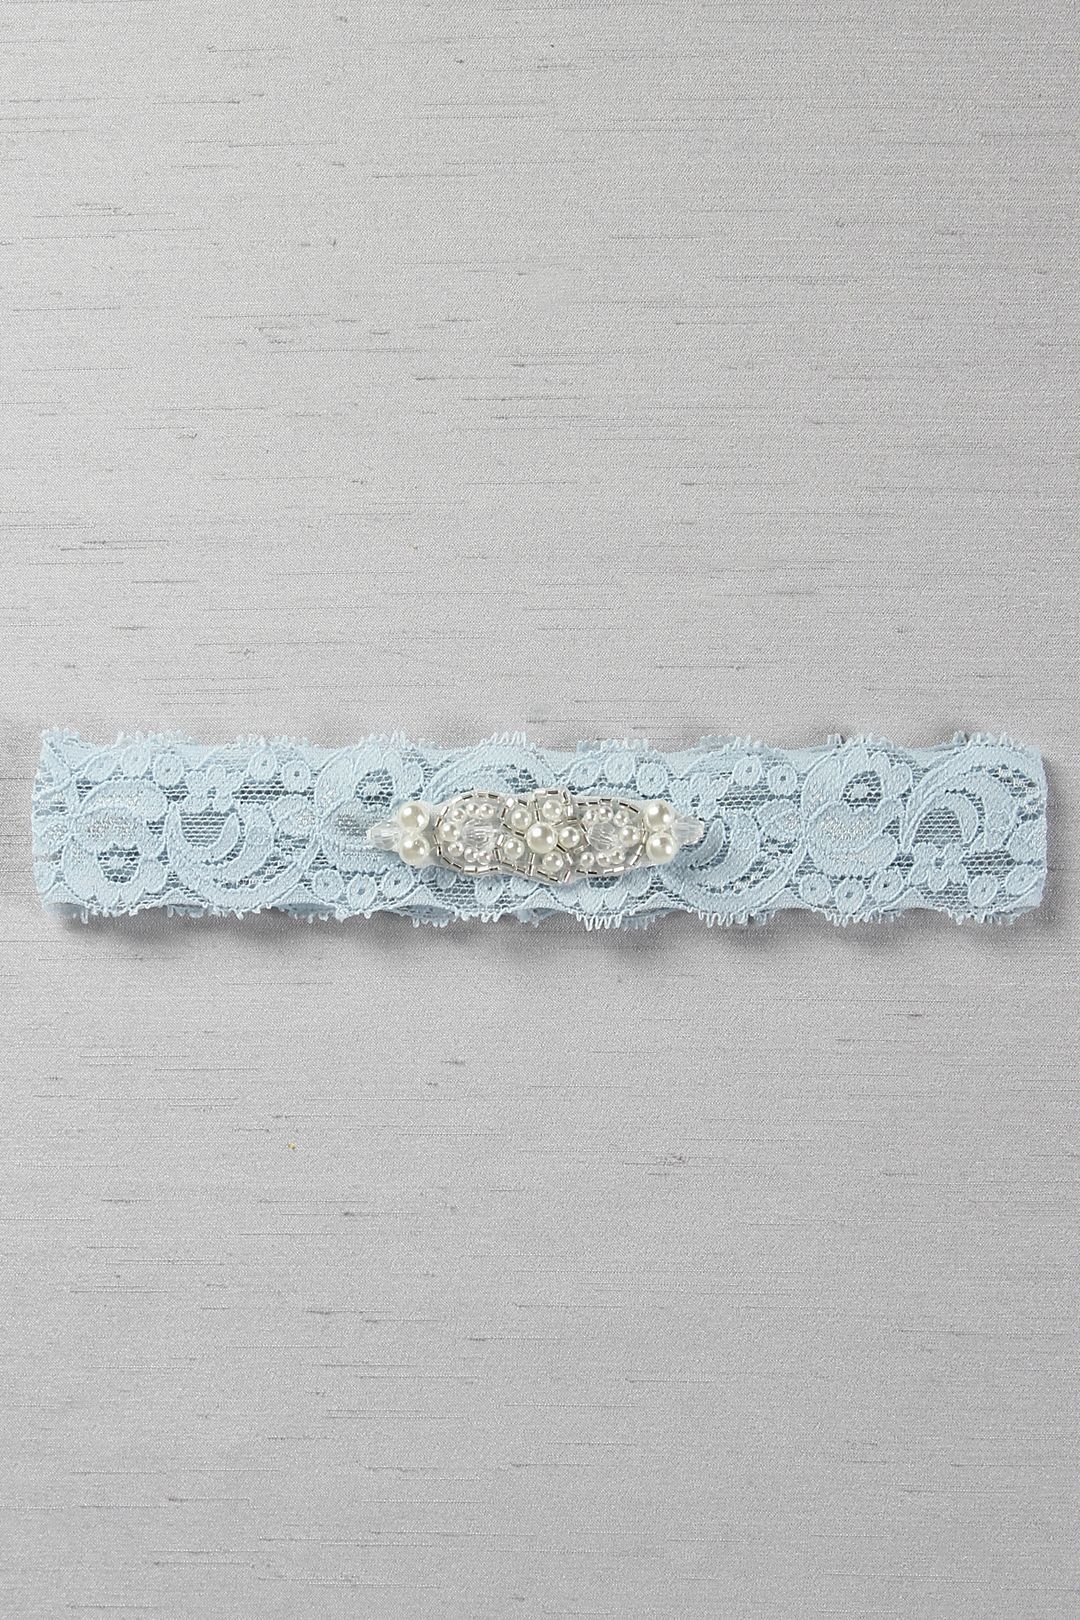 Stretch Lace Garter with Beaded Pearl Applique Image 1